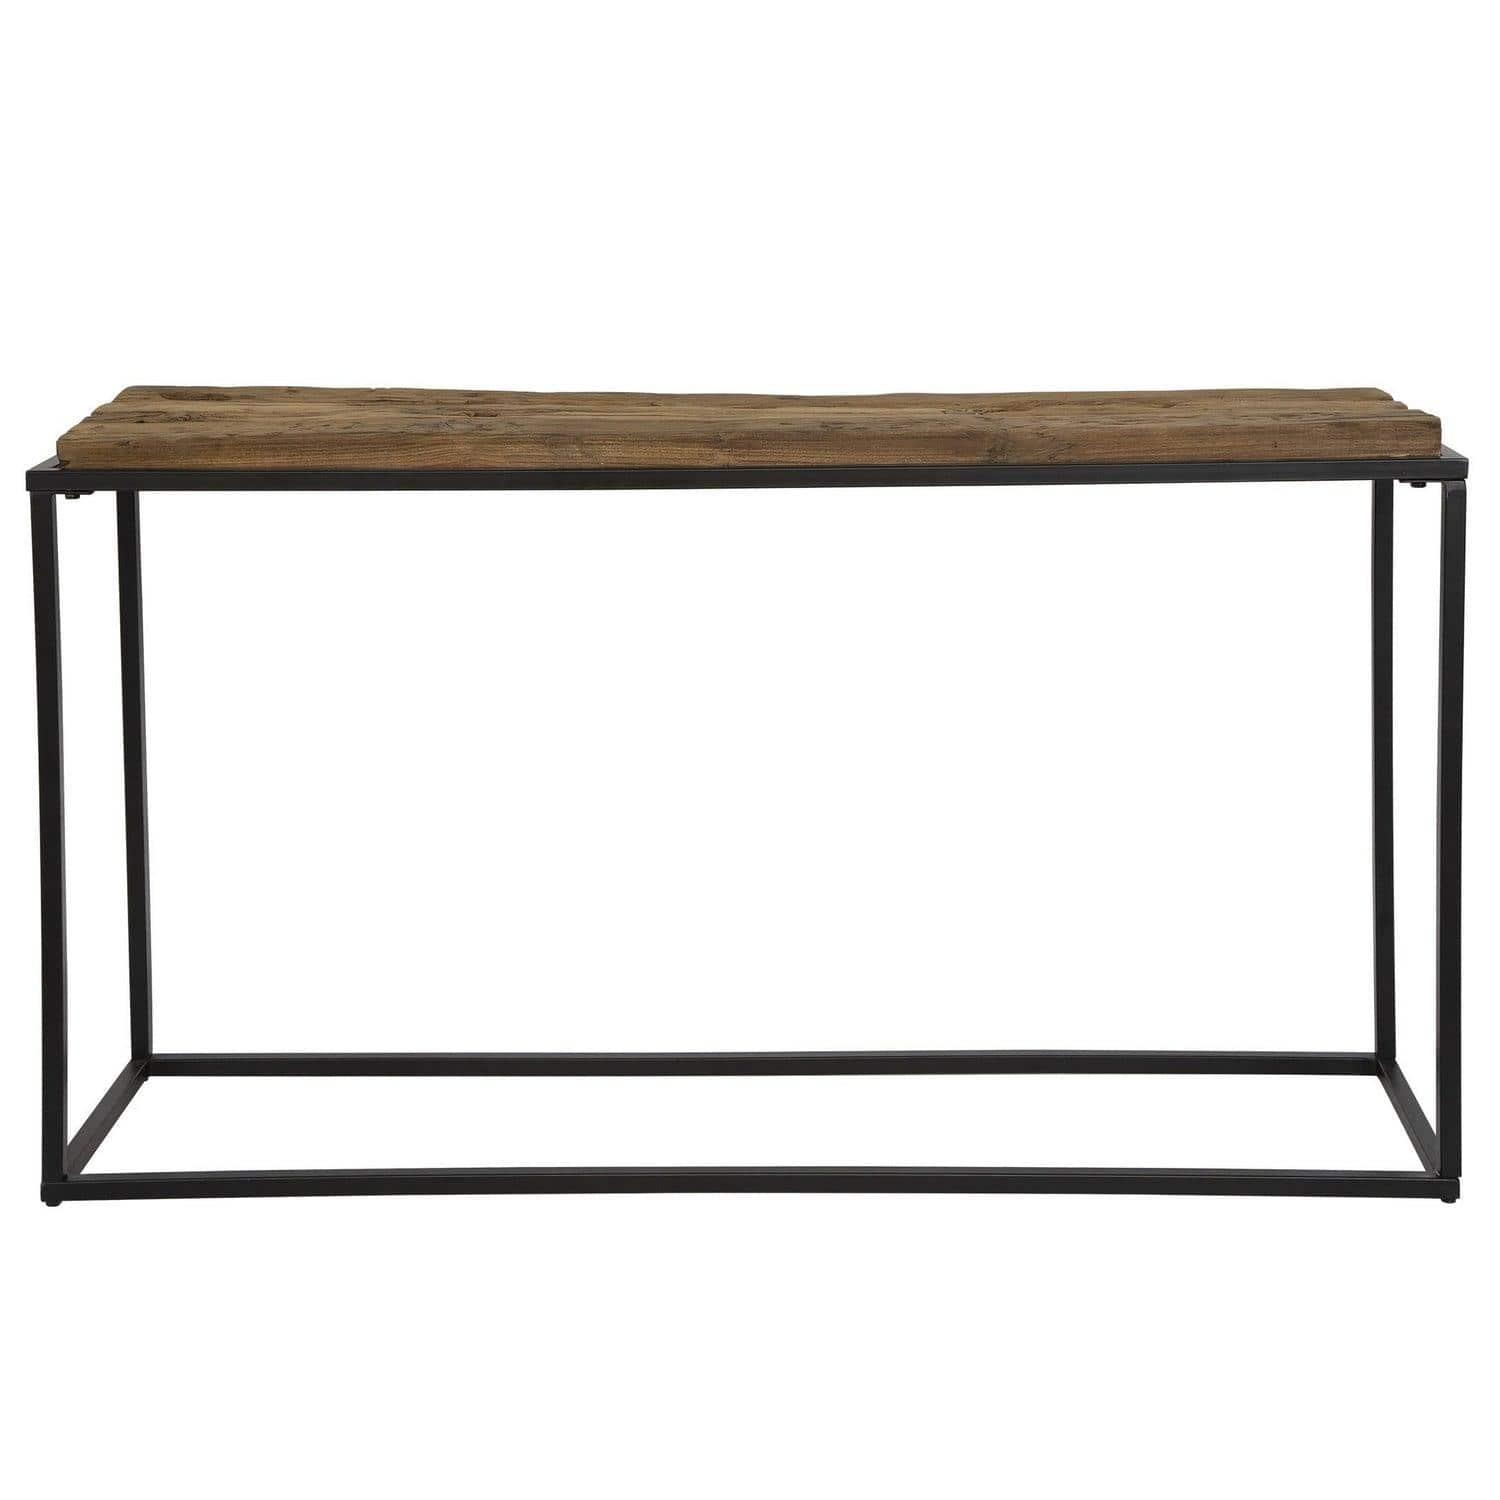 The Uttermost - Holston Console Table - 25156 | Montreal Lighting & Hardware